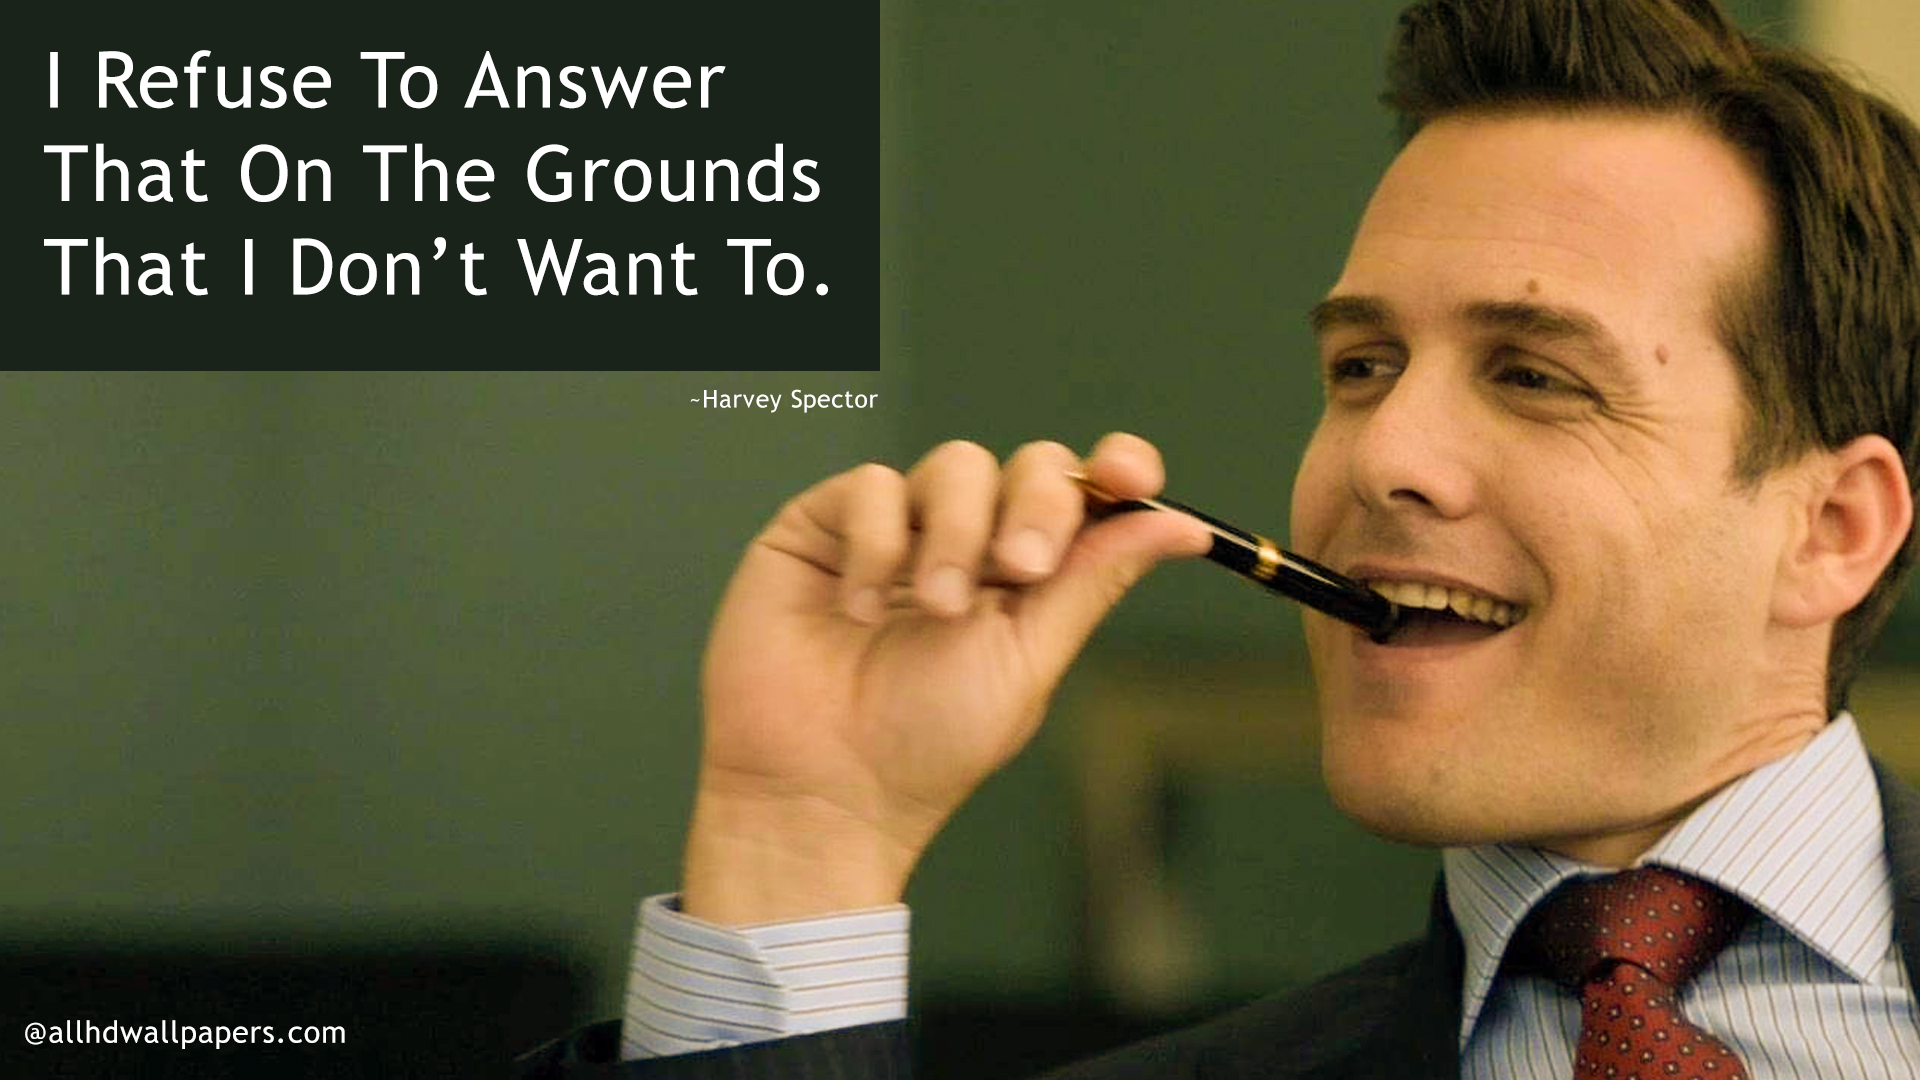 Harvey Specter Quotes will Inspire you to Work Hard